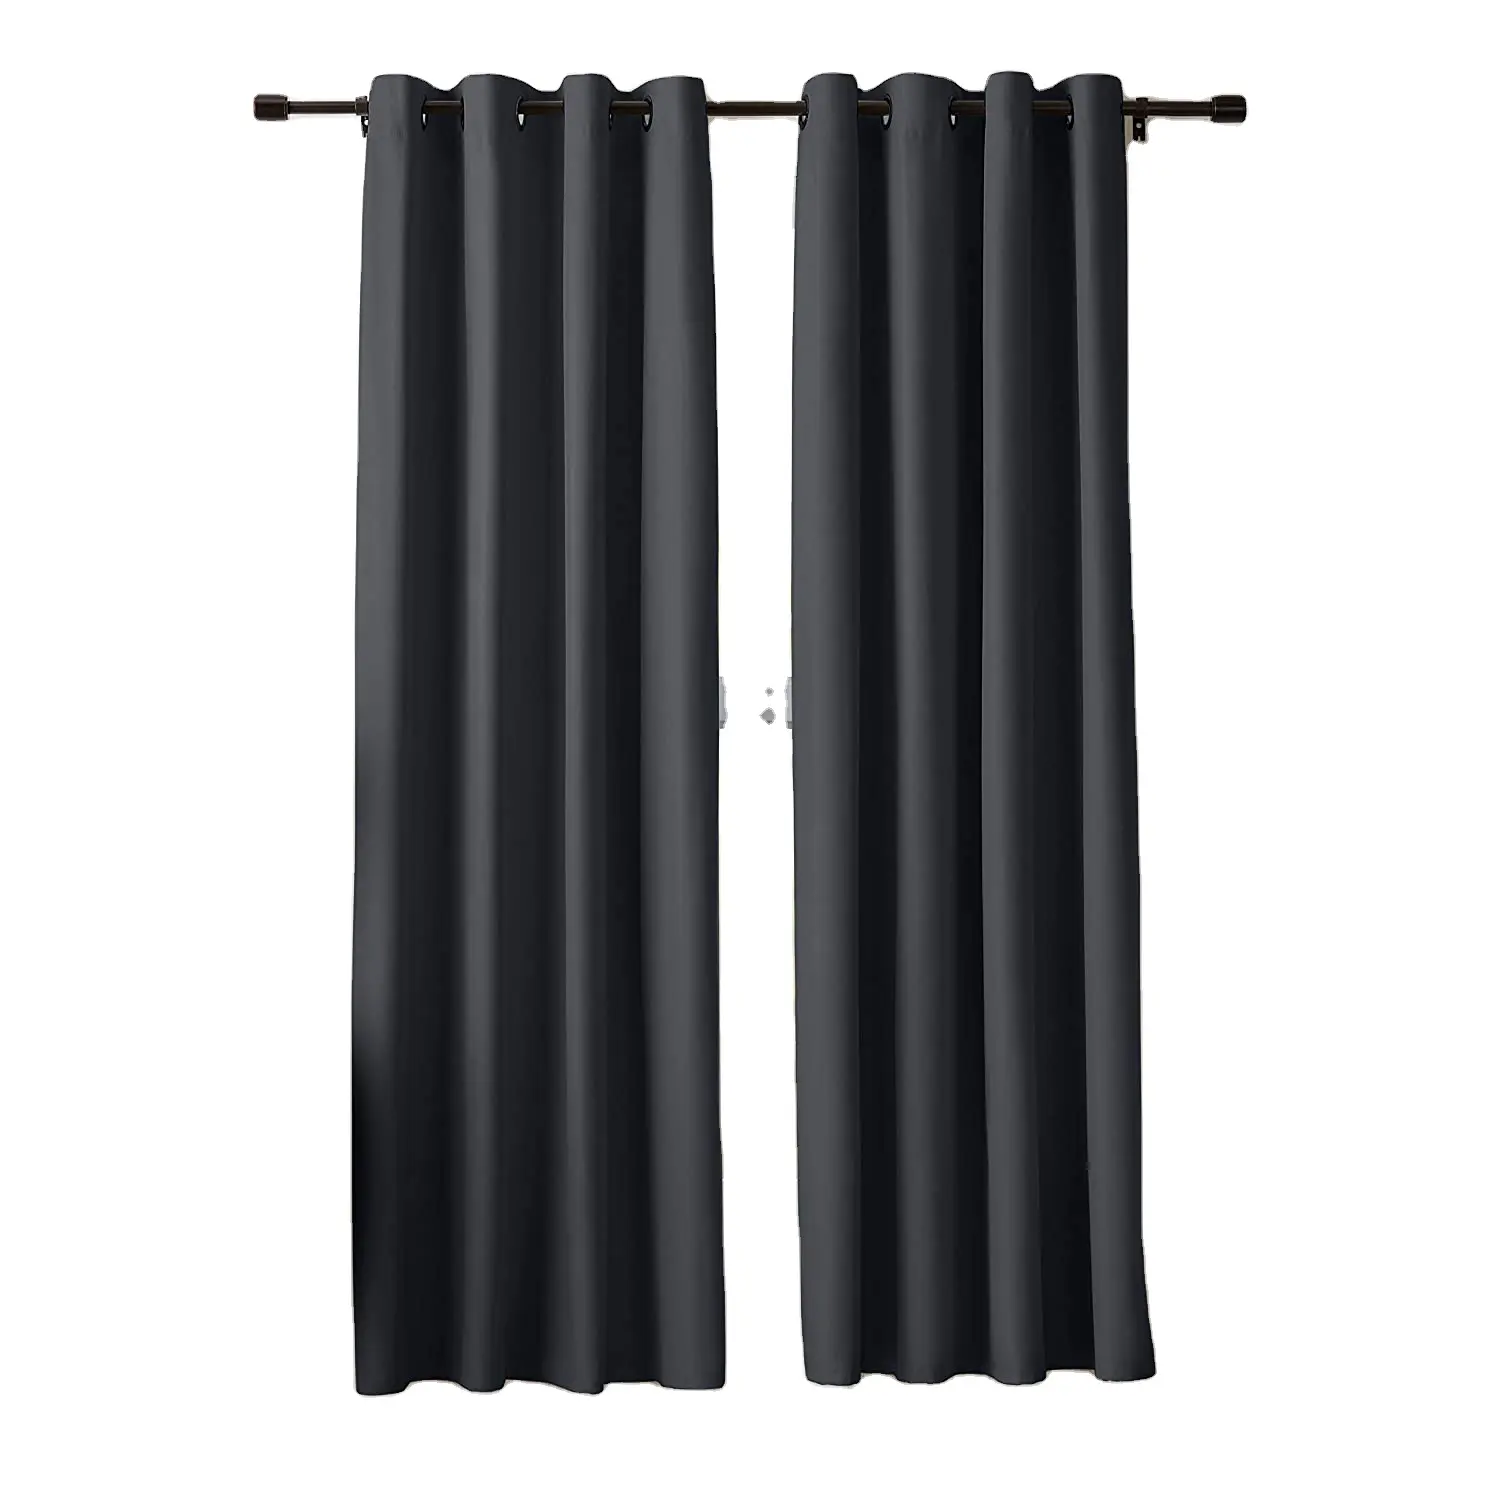 Blackout for Bedroom Thermal Insulated Lined Double Layer Curtain Energy Saving Room Darkening Window Curtains